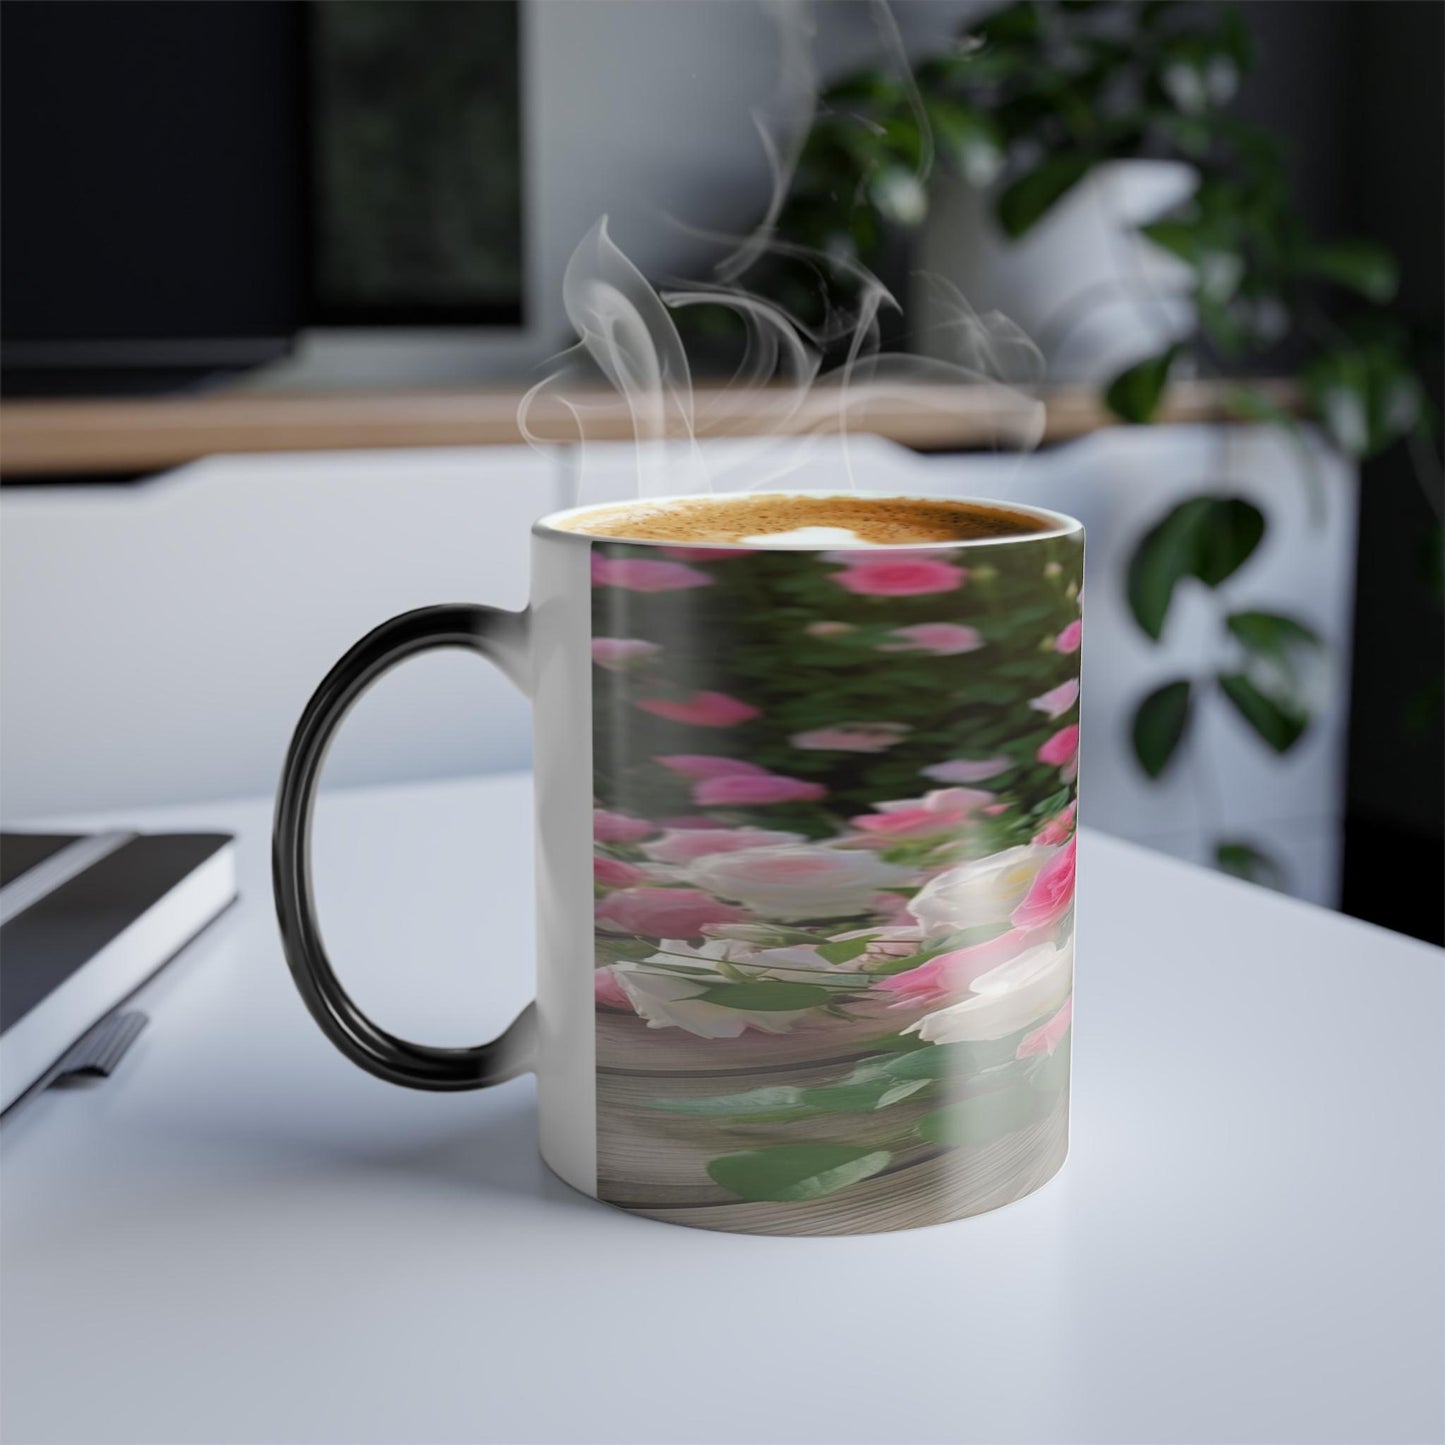 Enchanting Flower Magic Morphing Mug 11oz - Lovely Heat Sensitive Coffee Tea Cup with Flower, Rose, Tree, Heart Designs - Special Gifts for Flower Lovers 5